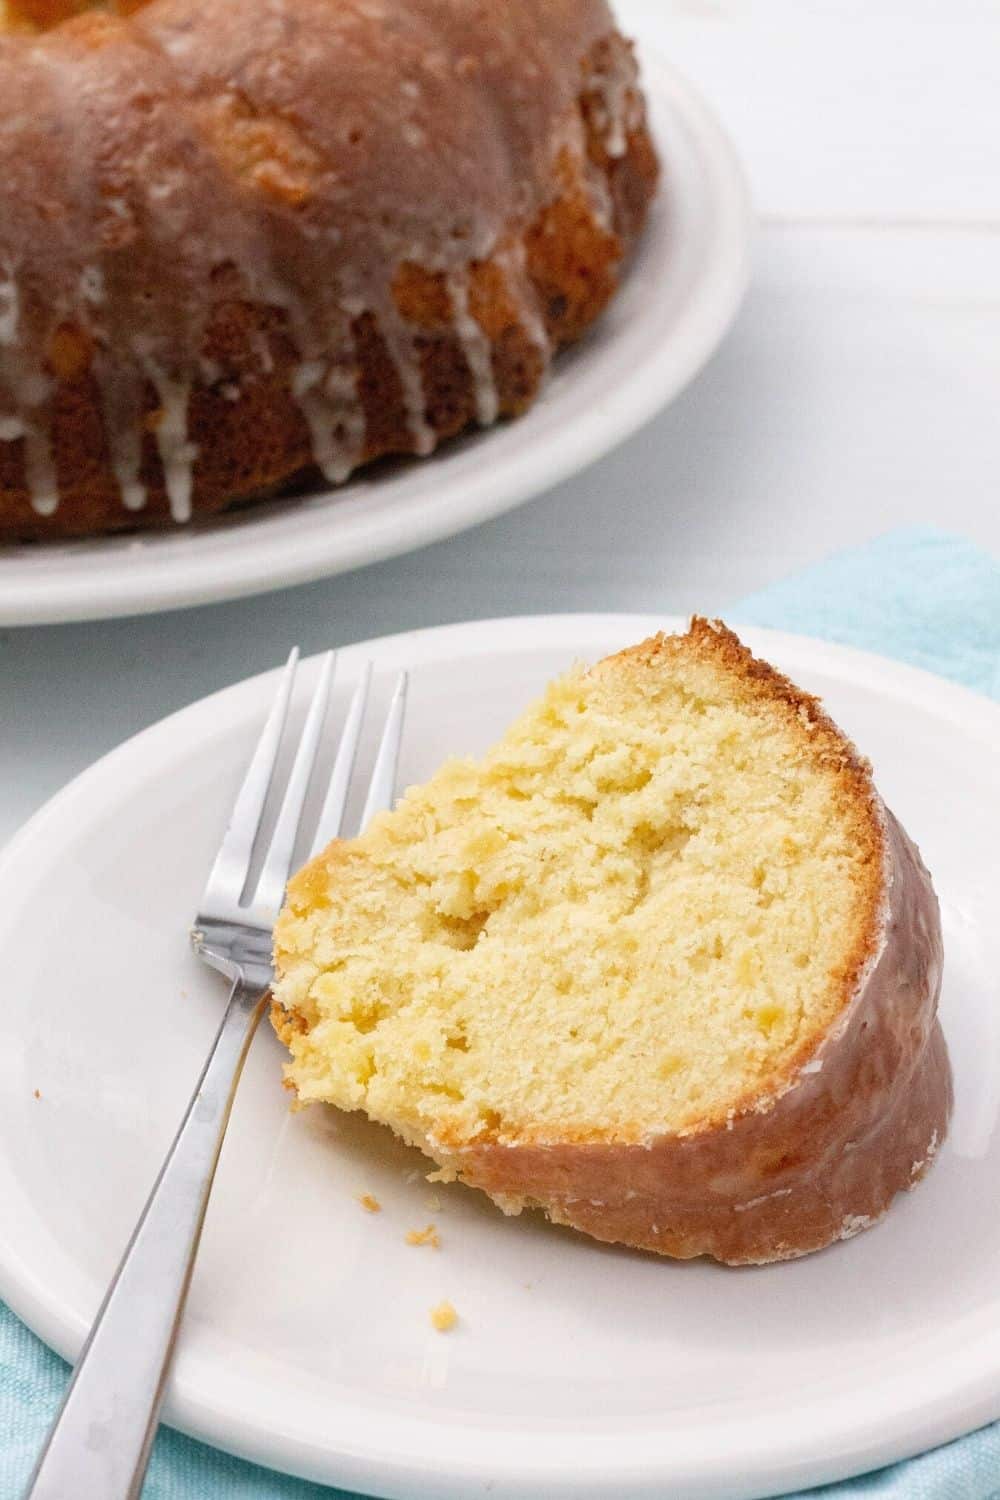 close-up view of a slice of pound cake made with pineapple, showing the moist interior.